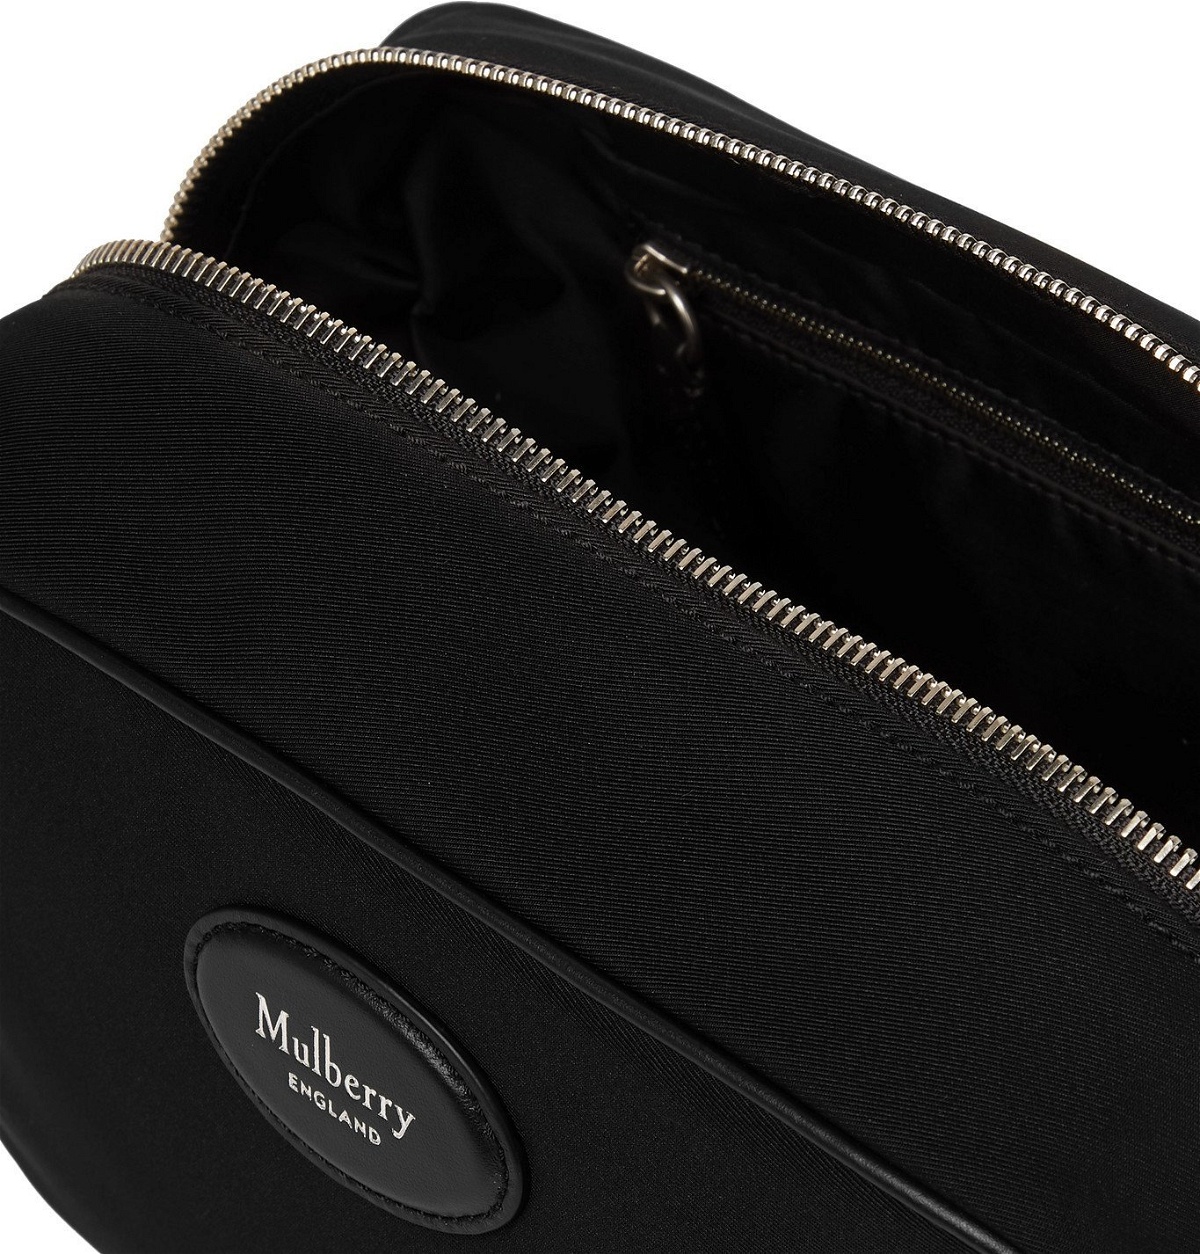 Mulberry Wallet in Black, Leather | Handbag Clinic